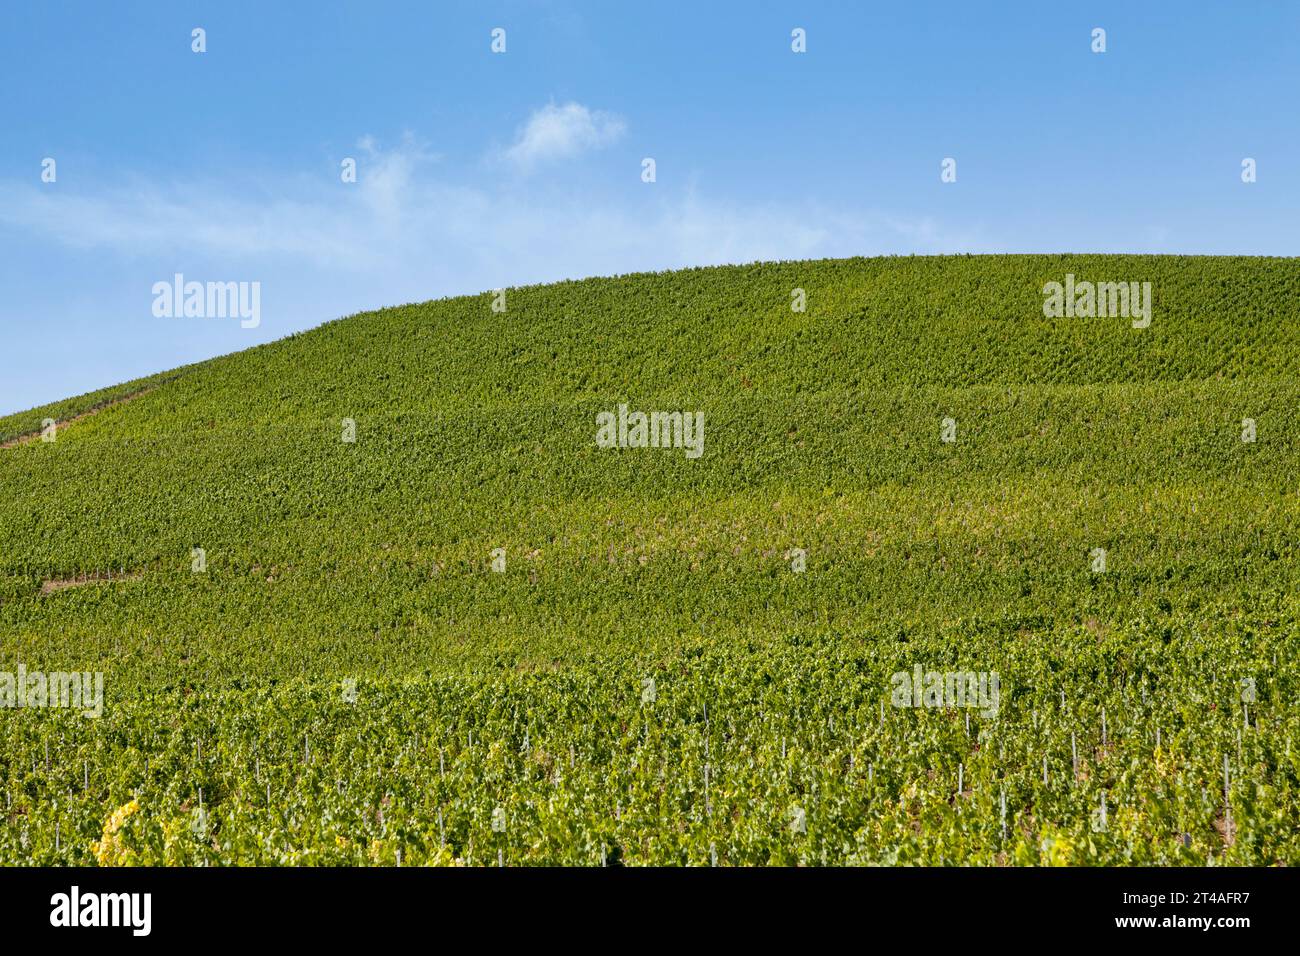 Vineyard in Aÿ, a town in the Champagne wine region. Stock Photo